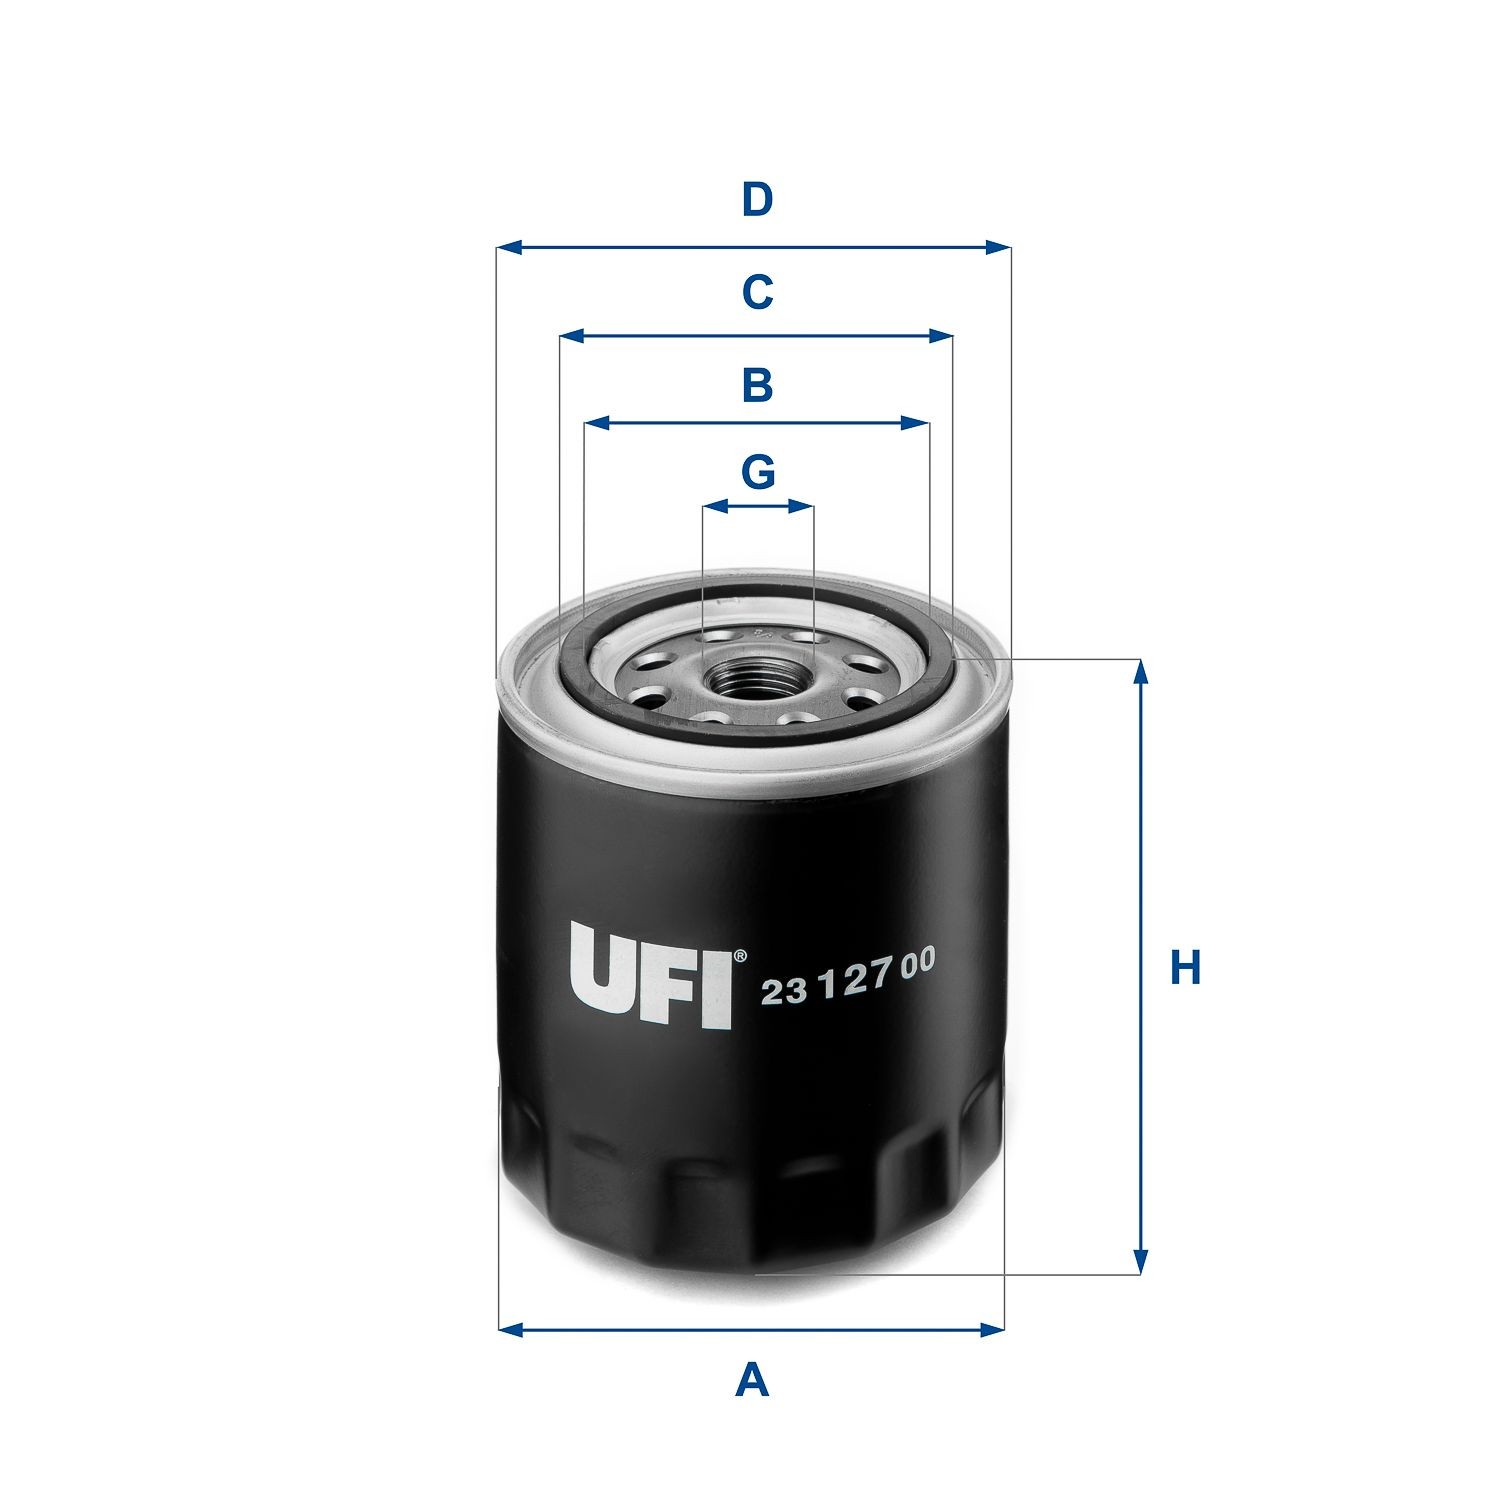 23.127.00 Oil filter 23.127.00 UFI 3/4-16 UNF, with one anti-return valve, Spin-on Filter